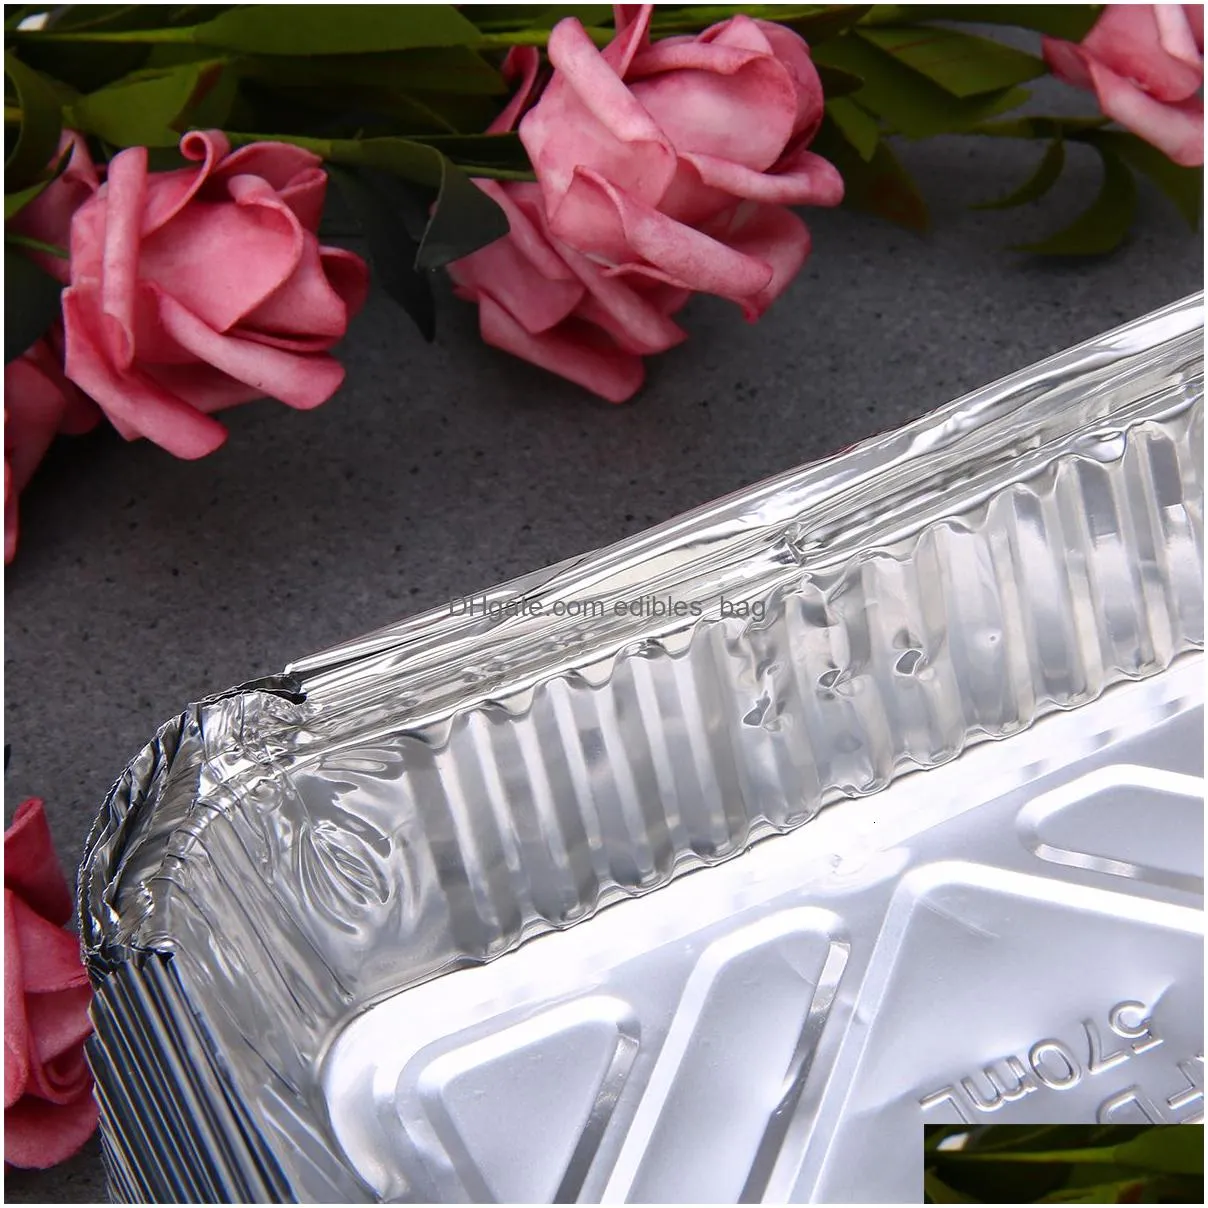 bbq tools accessories 30x aluminum foil grease drip pans recyclable grill catch tray weber outdoor for indirect cooking 195 x144x4cm